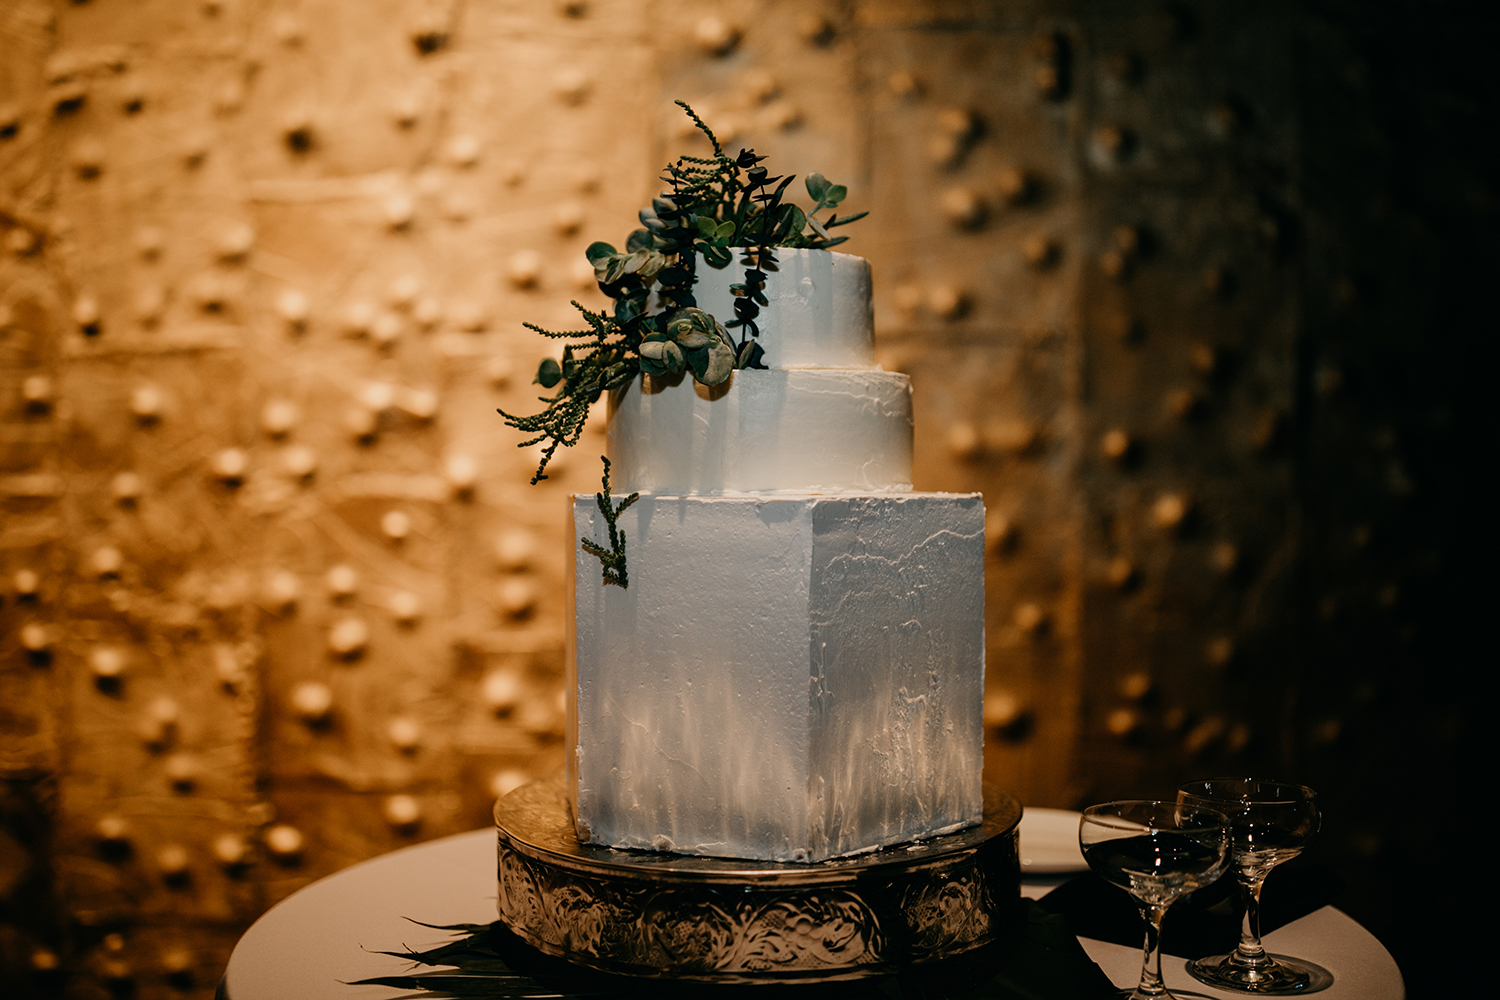 Terry + Nancy Millwick Wedding / Modern Los Angeles Wedding / LA Wedding / Moody Photography / Moody Wedding / DTLA Wedding / Millwick / Rachel Gulotta Photography / Lucky Day Events Co.